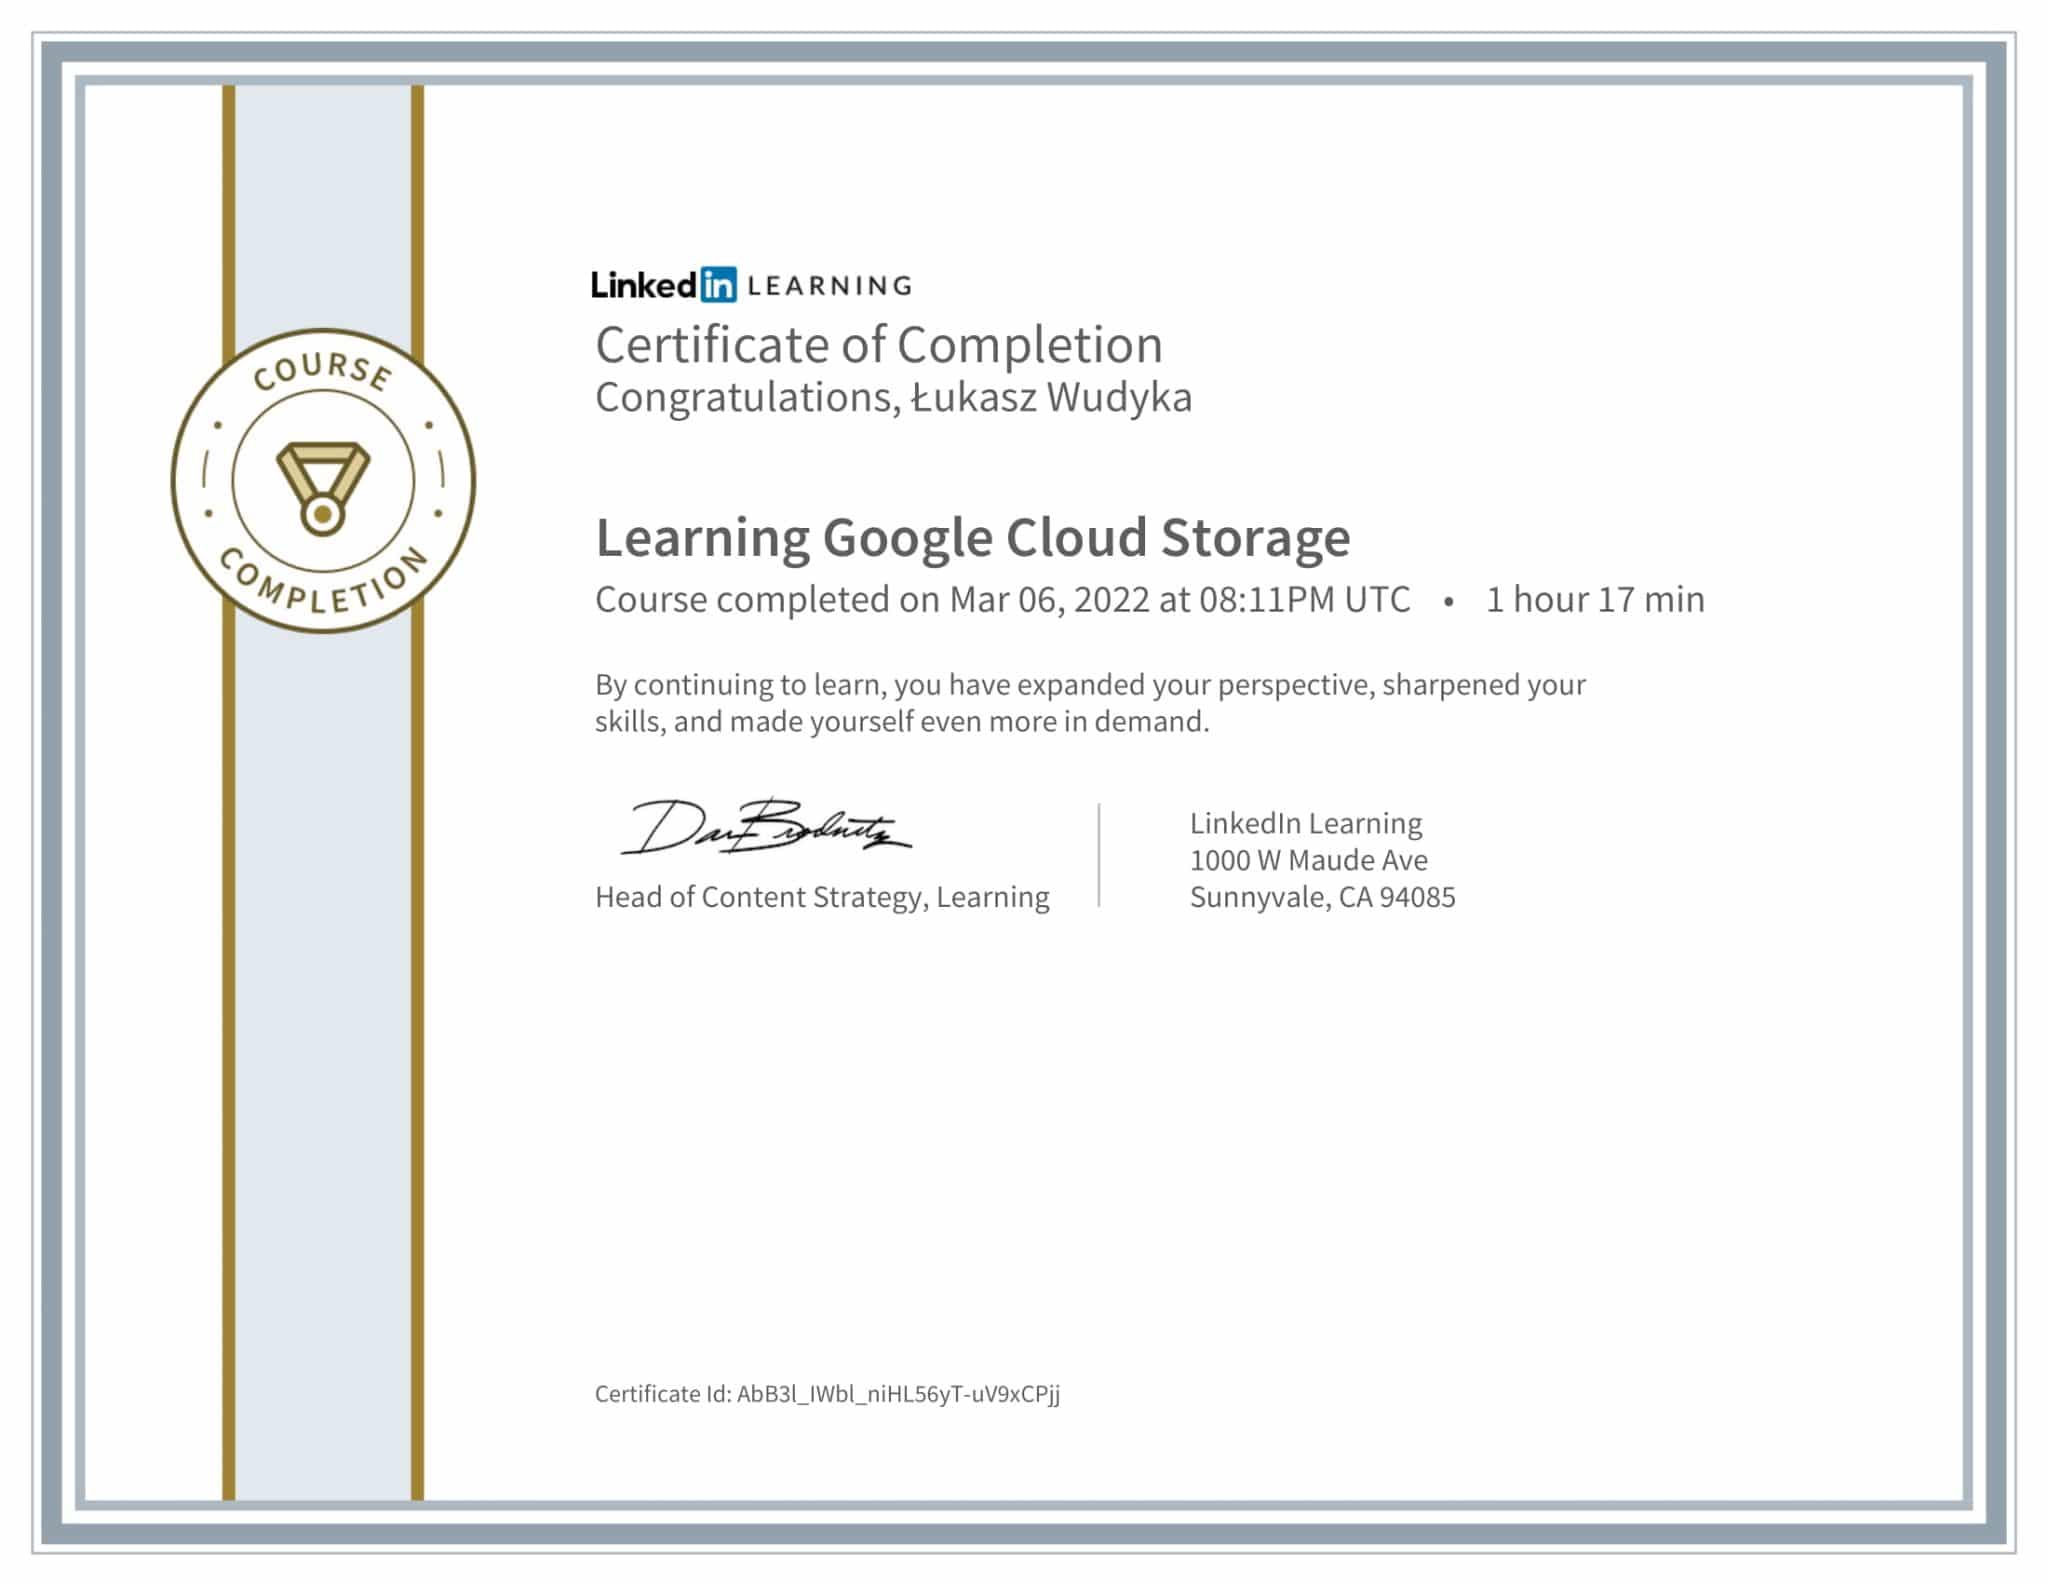 CertificateOfCompletion_Learning Google Cloud Storage-1